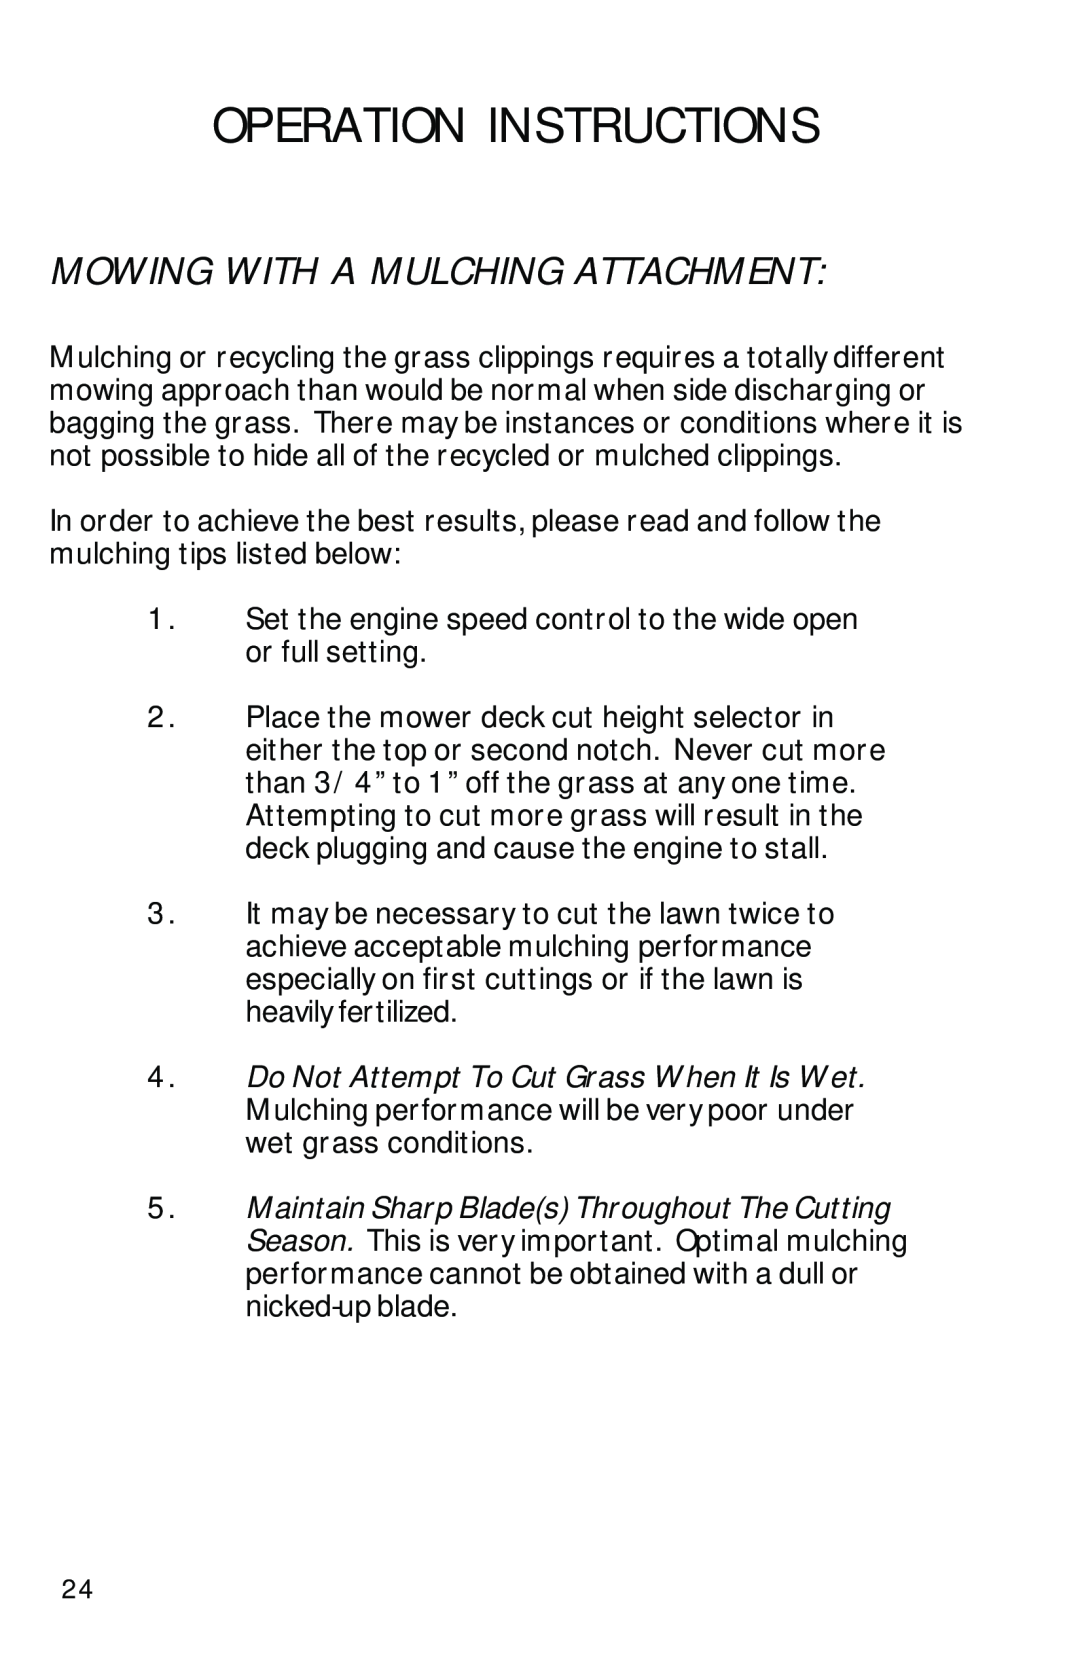 Dixon ZTR 2002 manual Mowing With A Mulching Attachment, Operation Instructions 